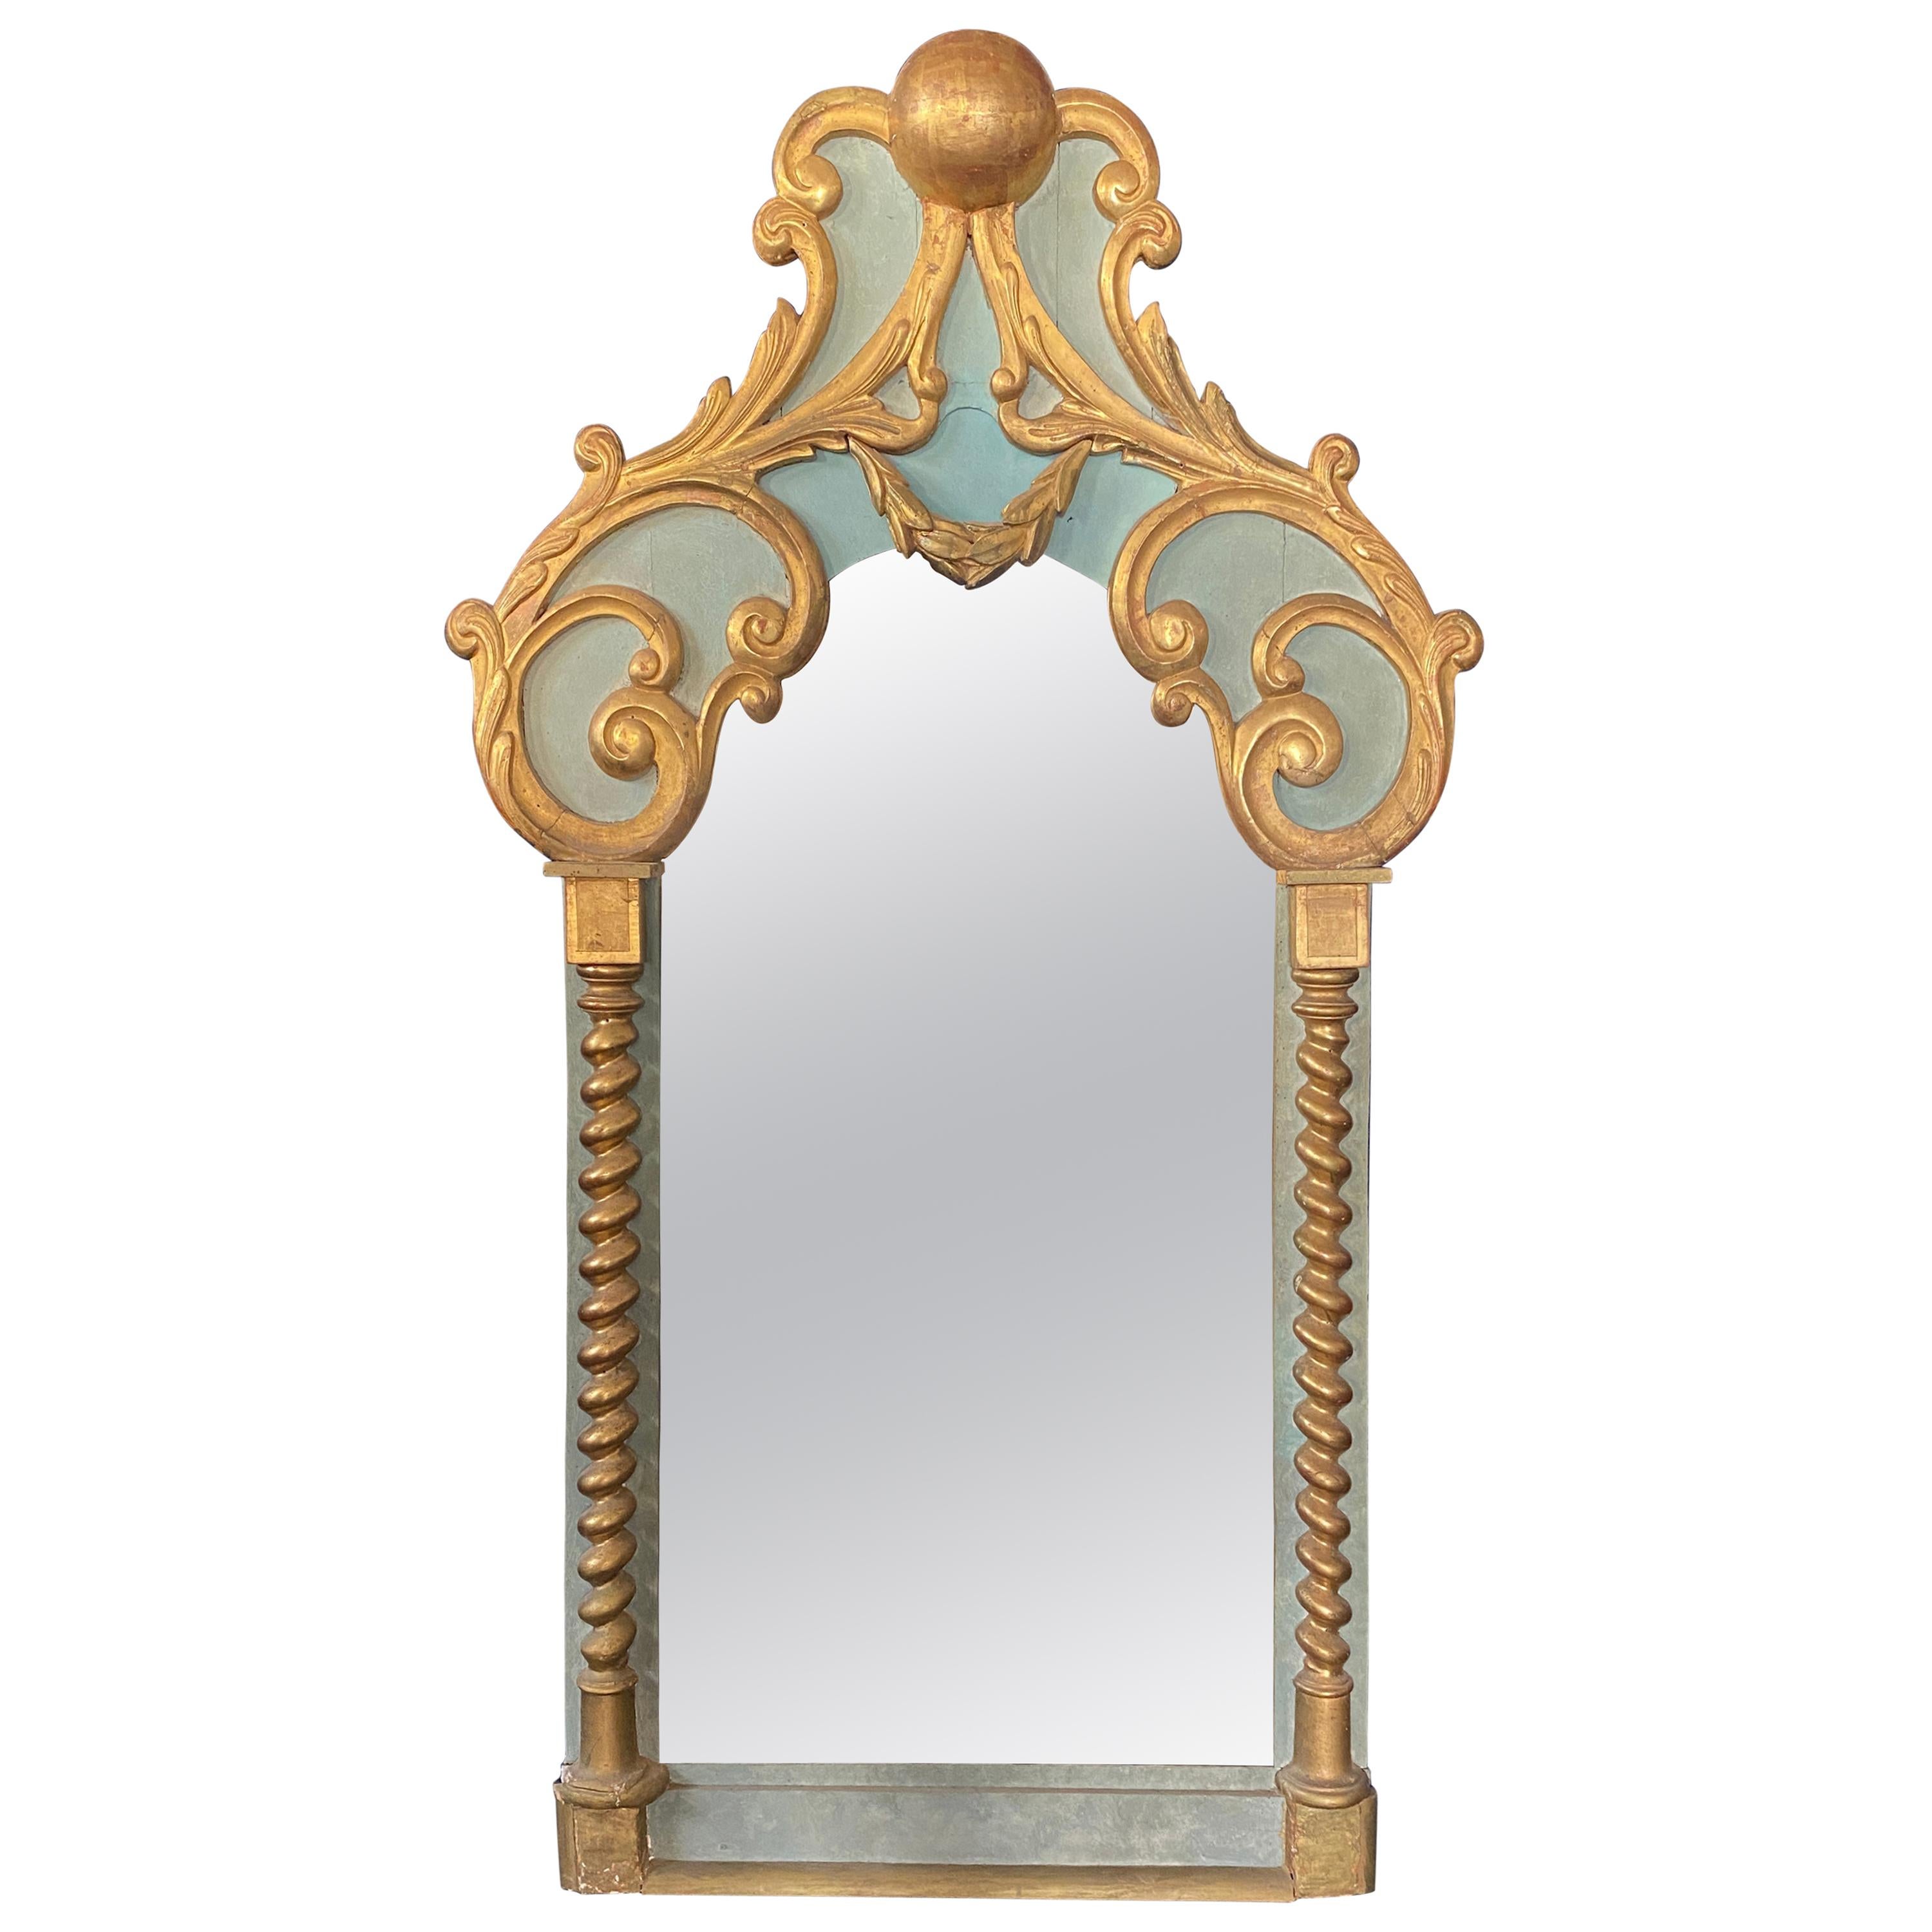 Rare Large Baroque Mirror circa 1900-1930, in Lacquered and Gilded Wood